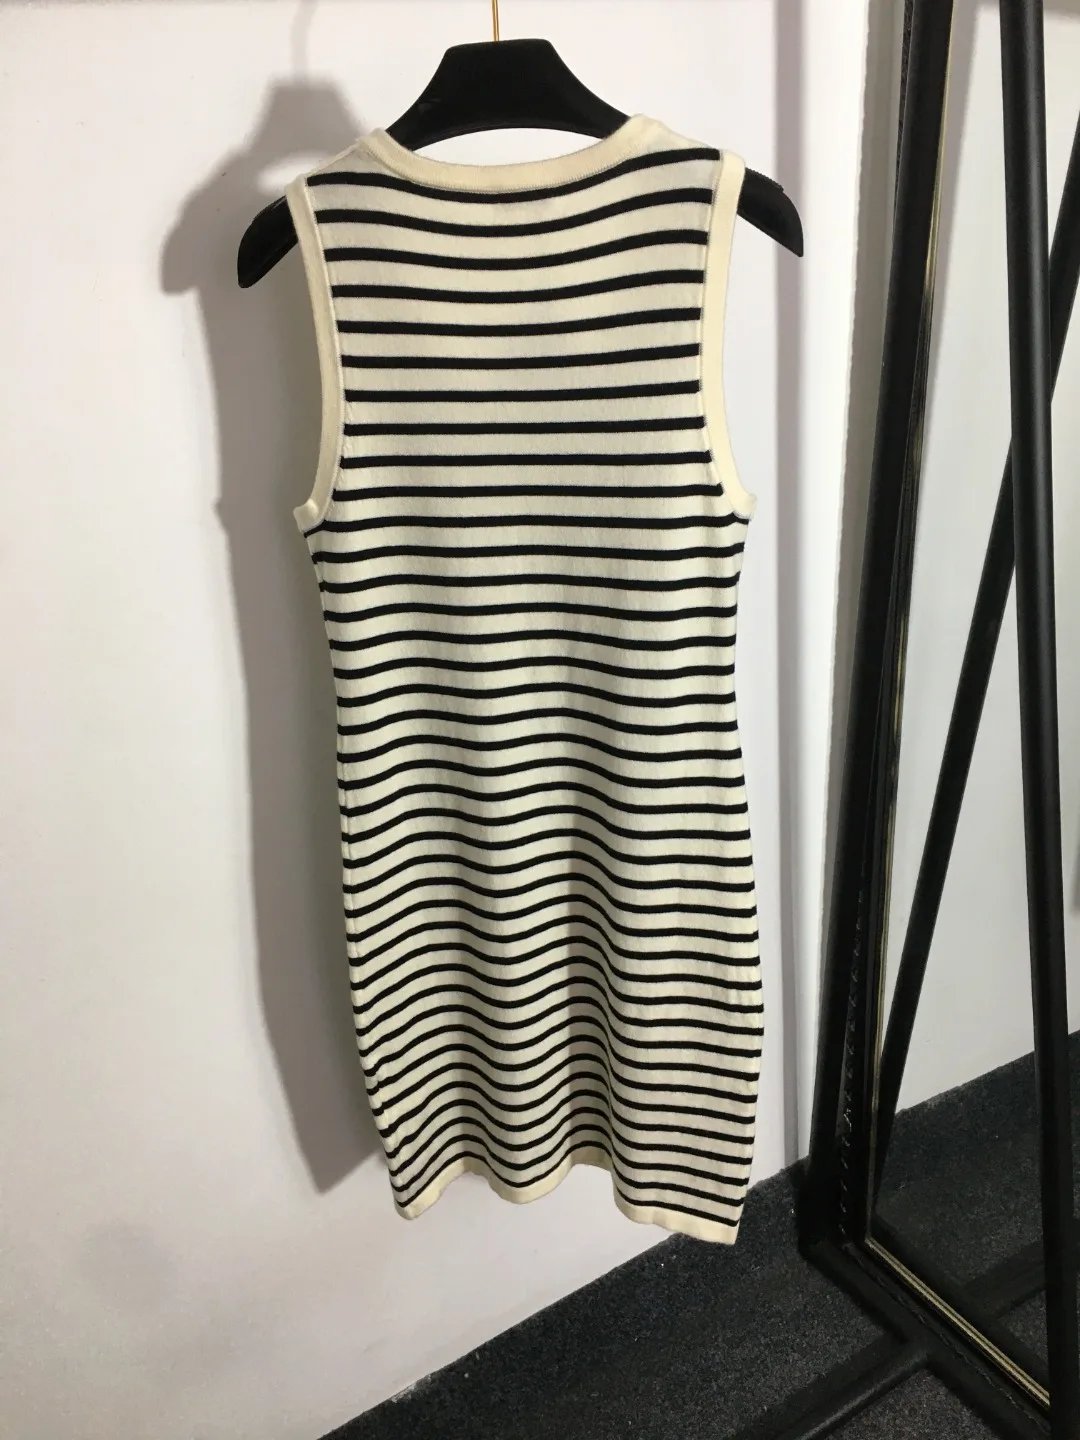 

Model No. 20230700 Spring And Summer New Striped Knitted Vest Dress, Off-White